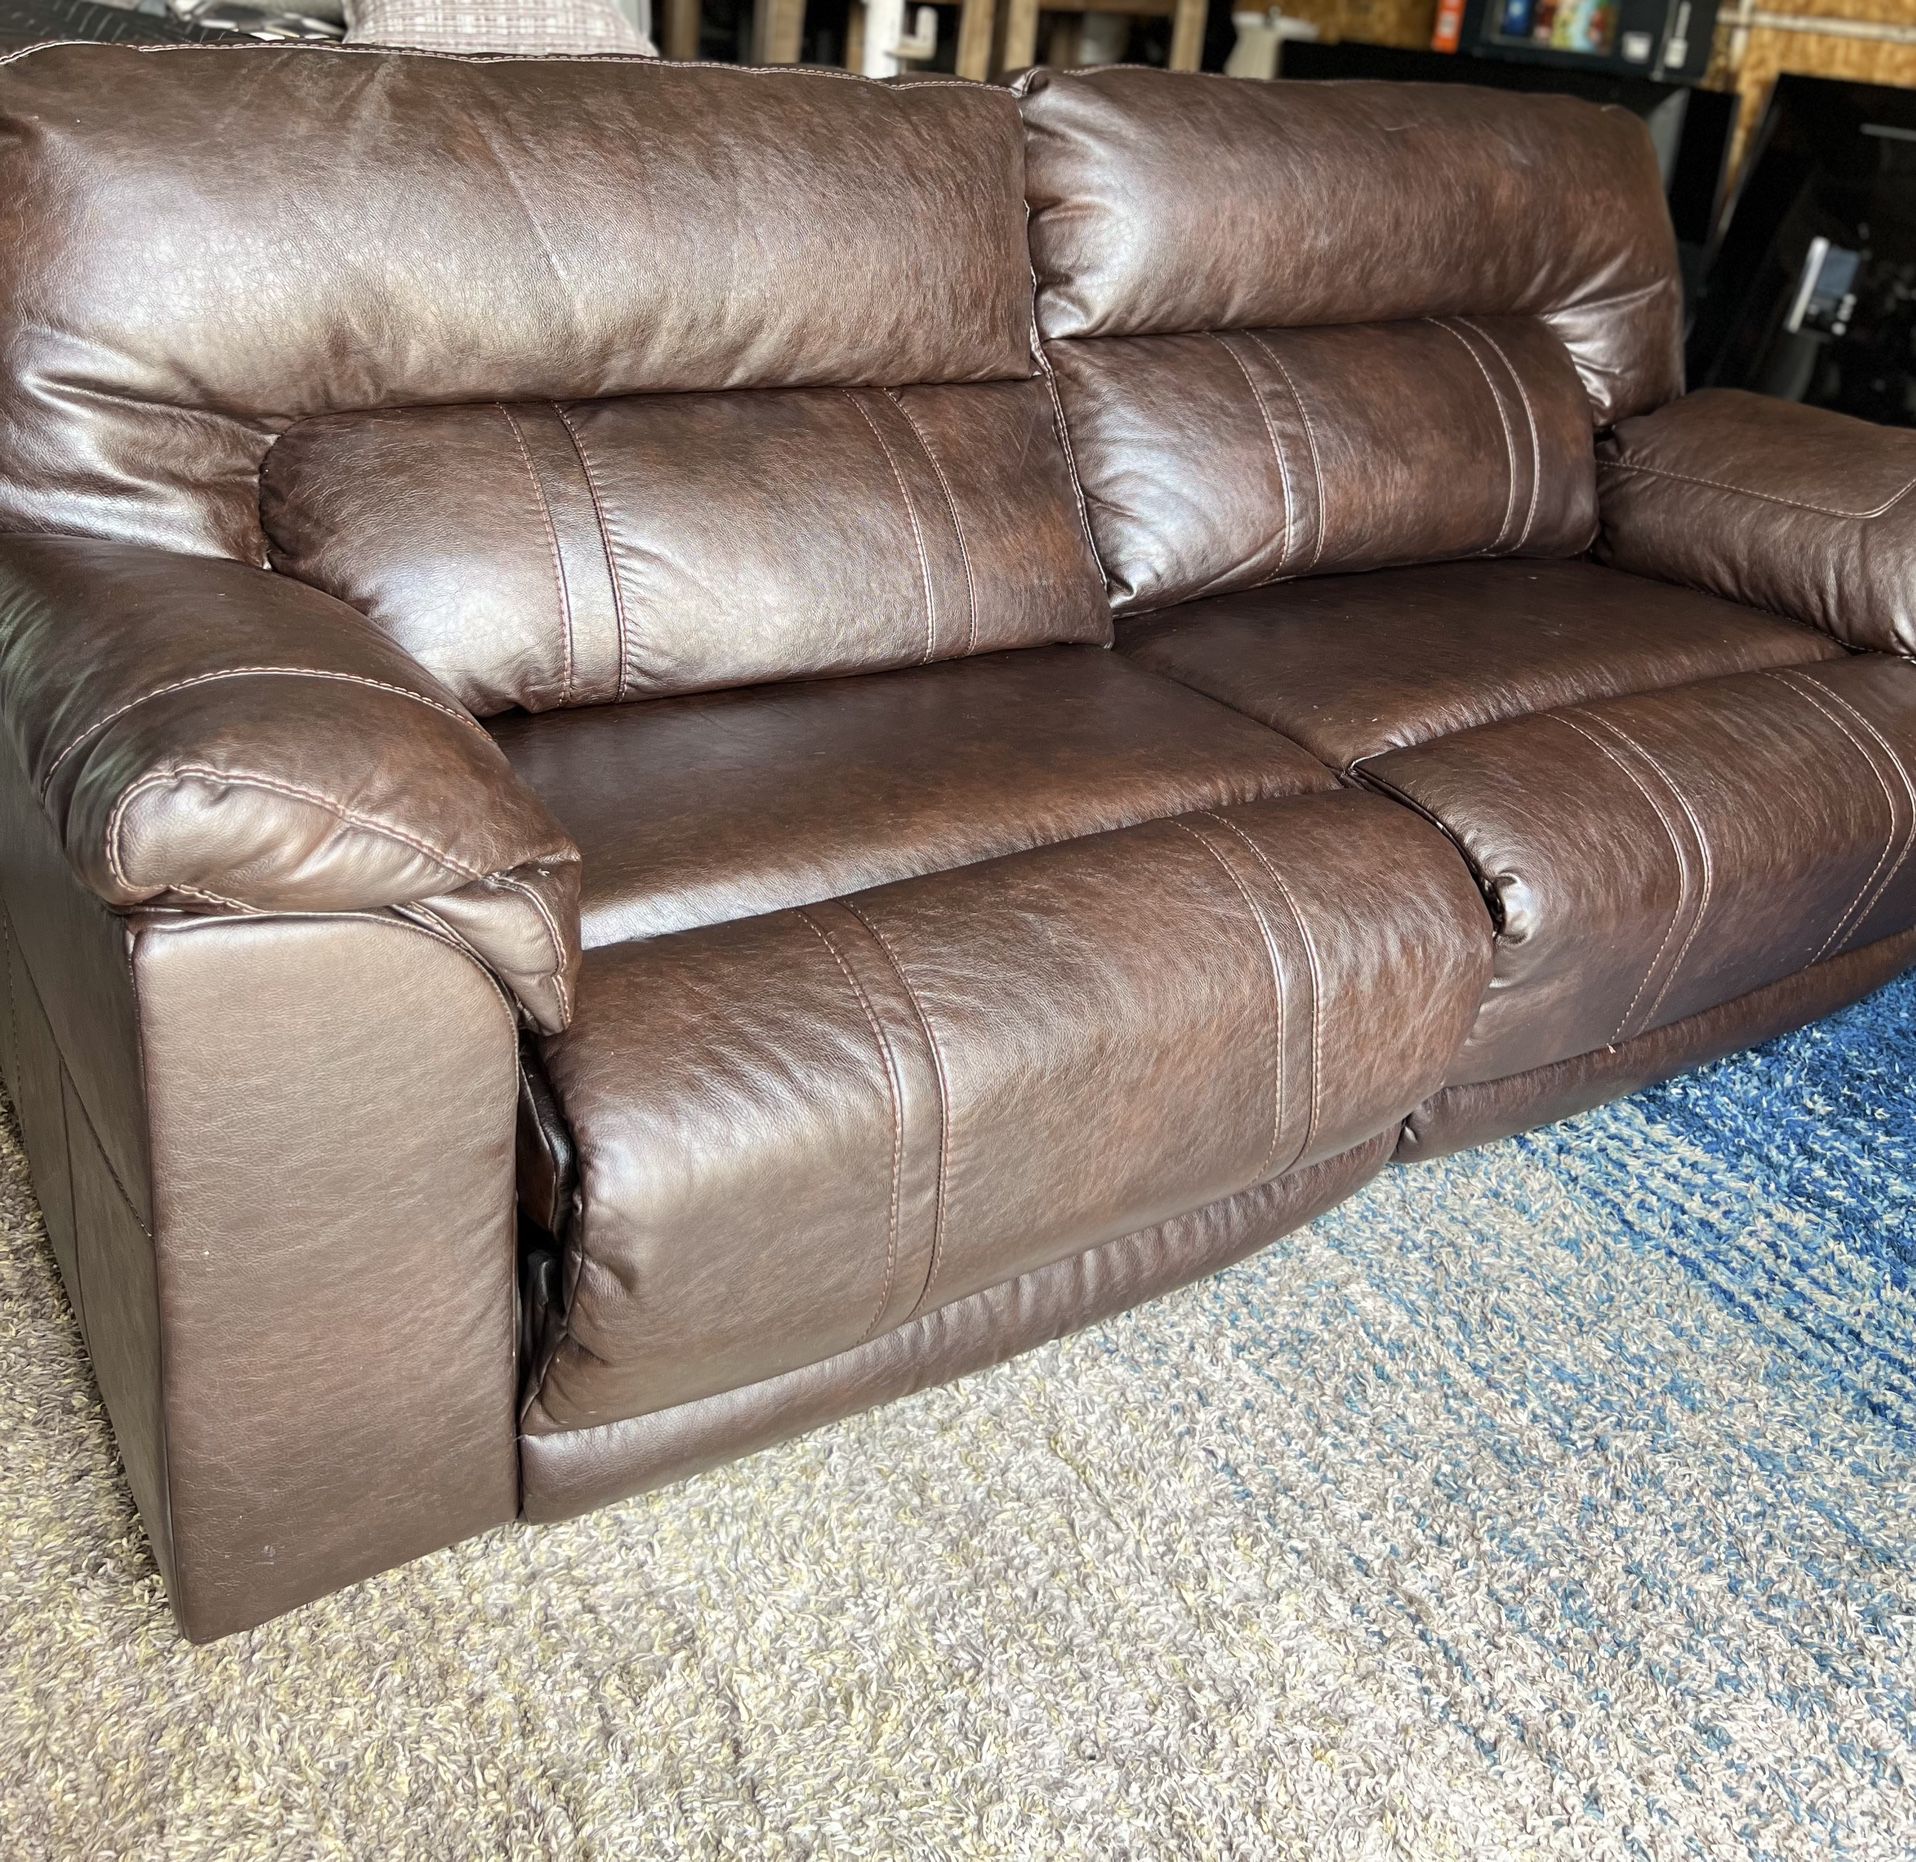 La-Z-boy Reclining original leather sofa in excellent condition like new    (H17"D34"L90")